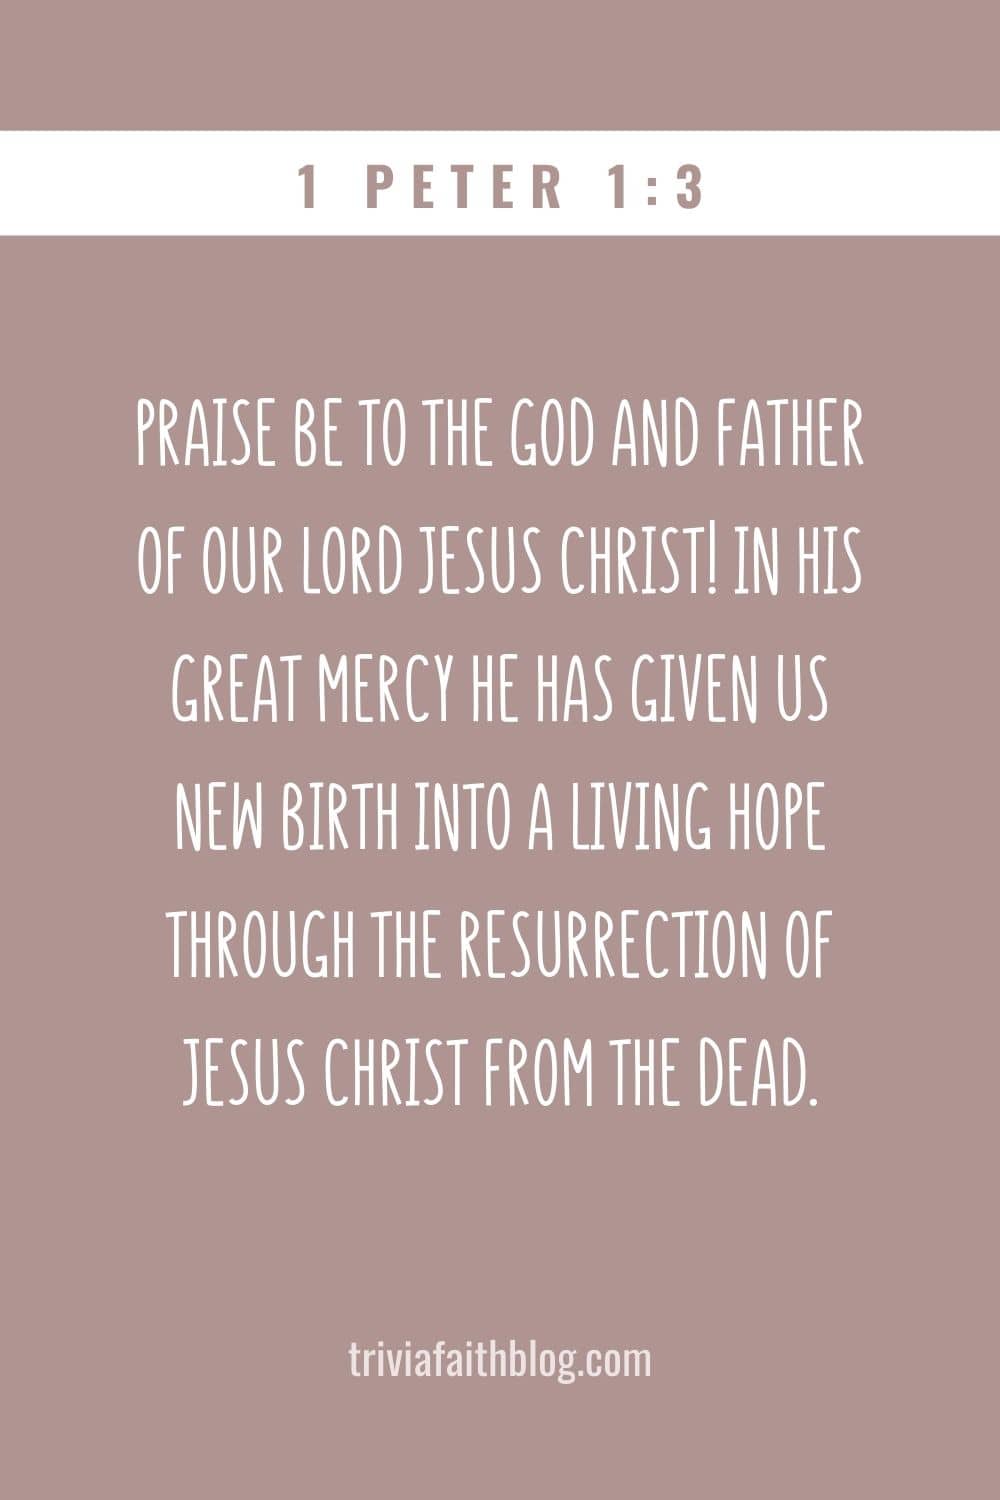 Praise be to the God and Father of our Lord Jesus Christ